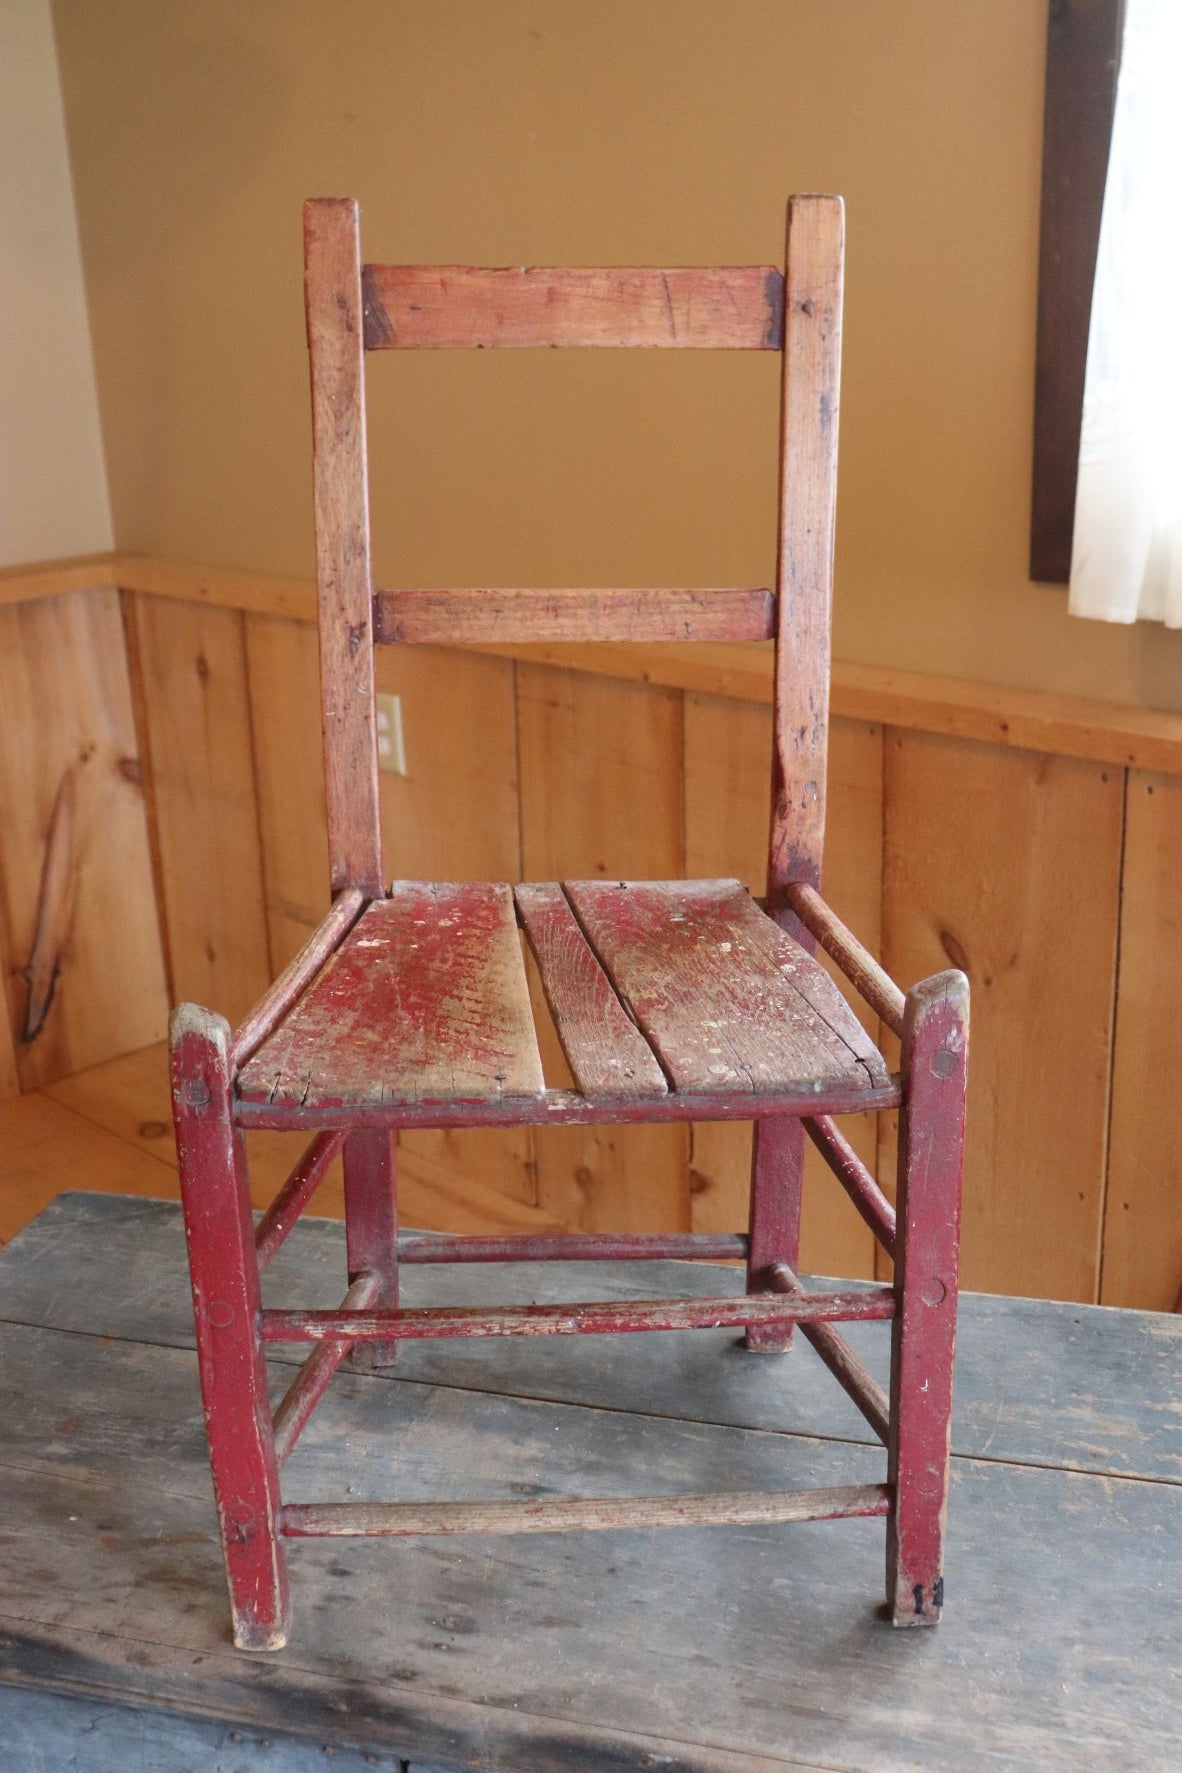 Old Primitive Wooden Chair With Remnants Of Red Paint